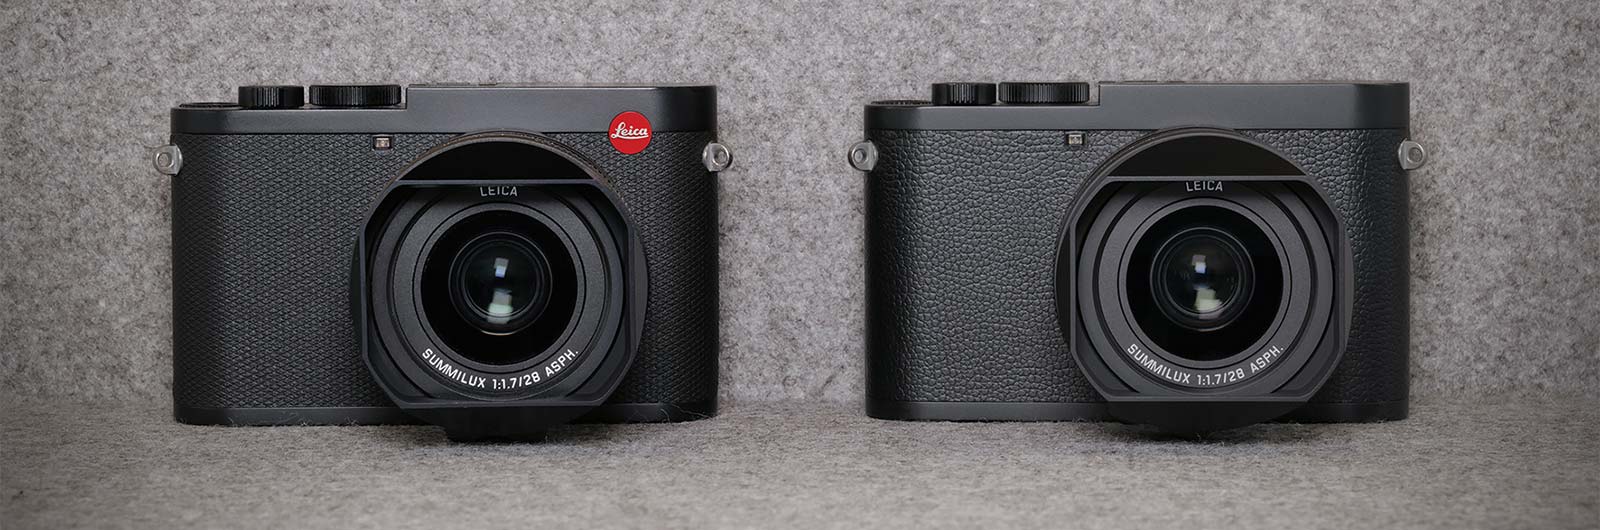 The Leica Q2 (left) next to the Leica Q2 Monochrom (right).